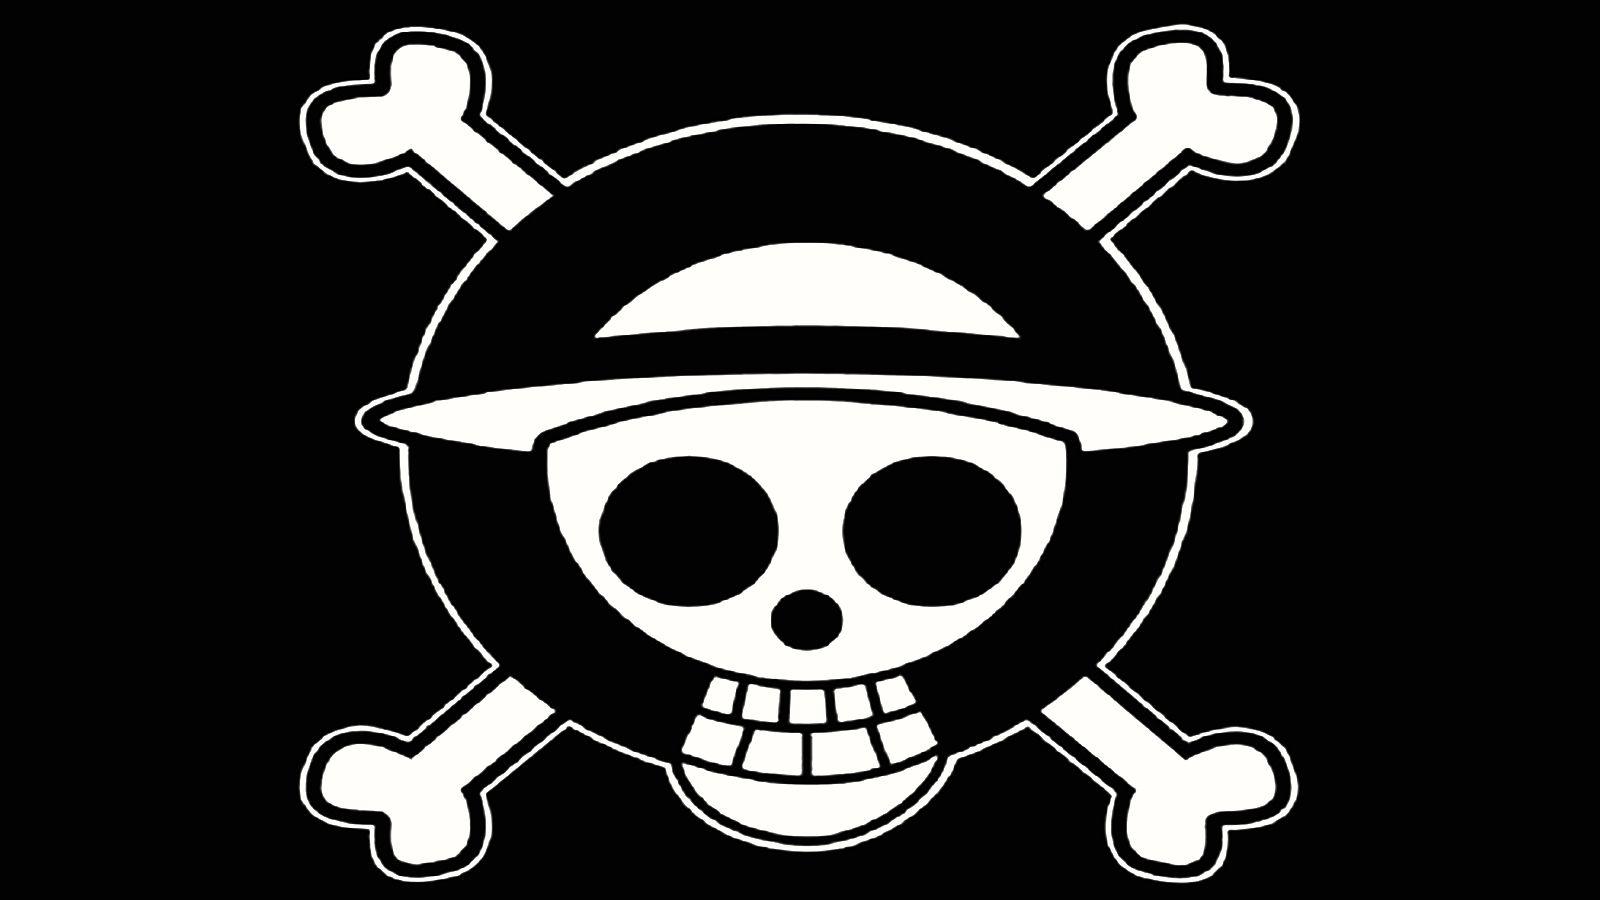 one piece flag Wallpaper and Background Imagex900